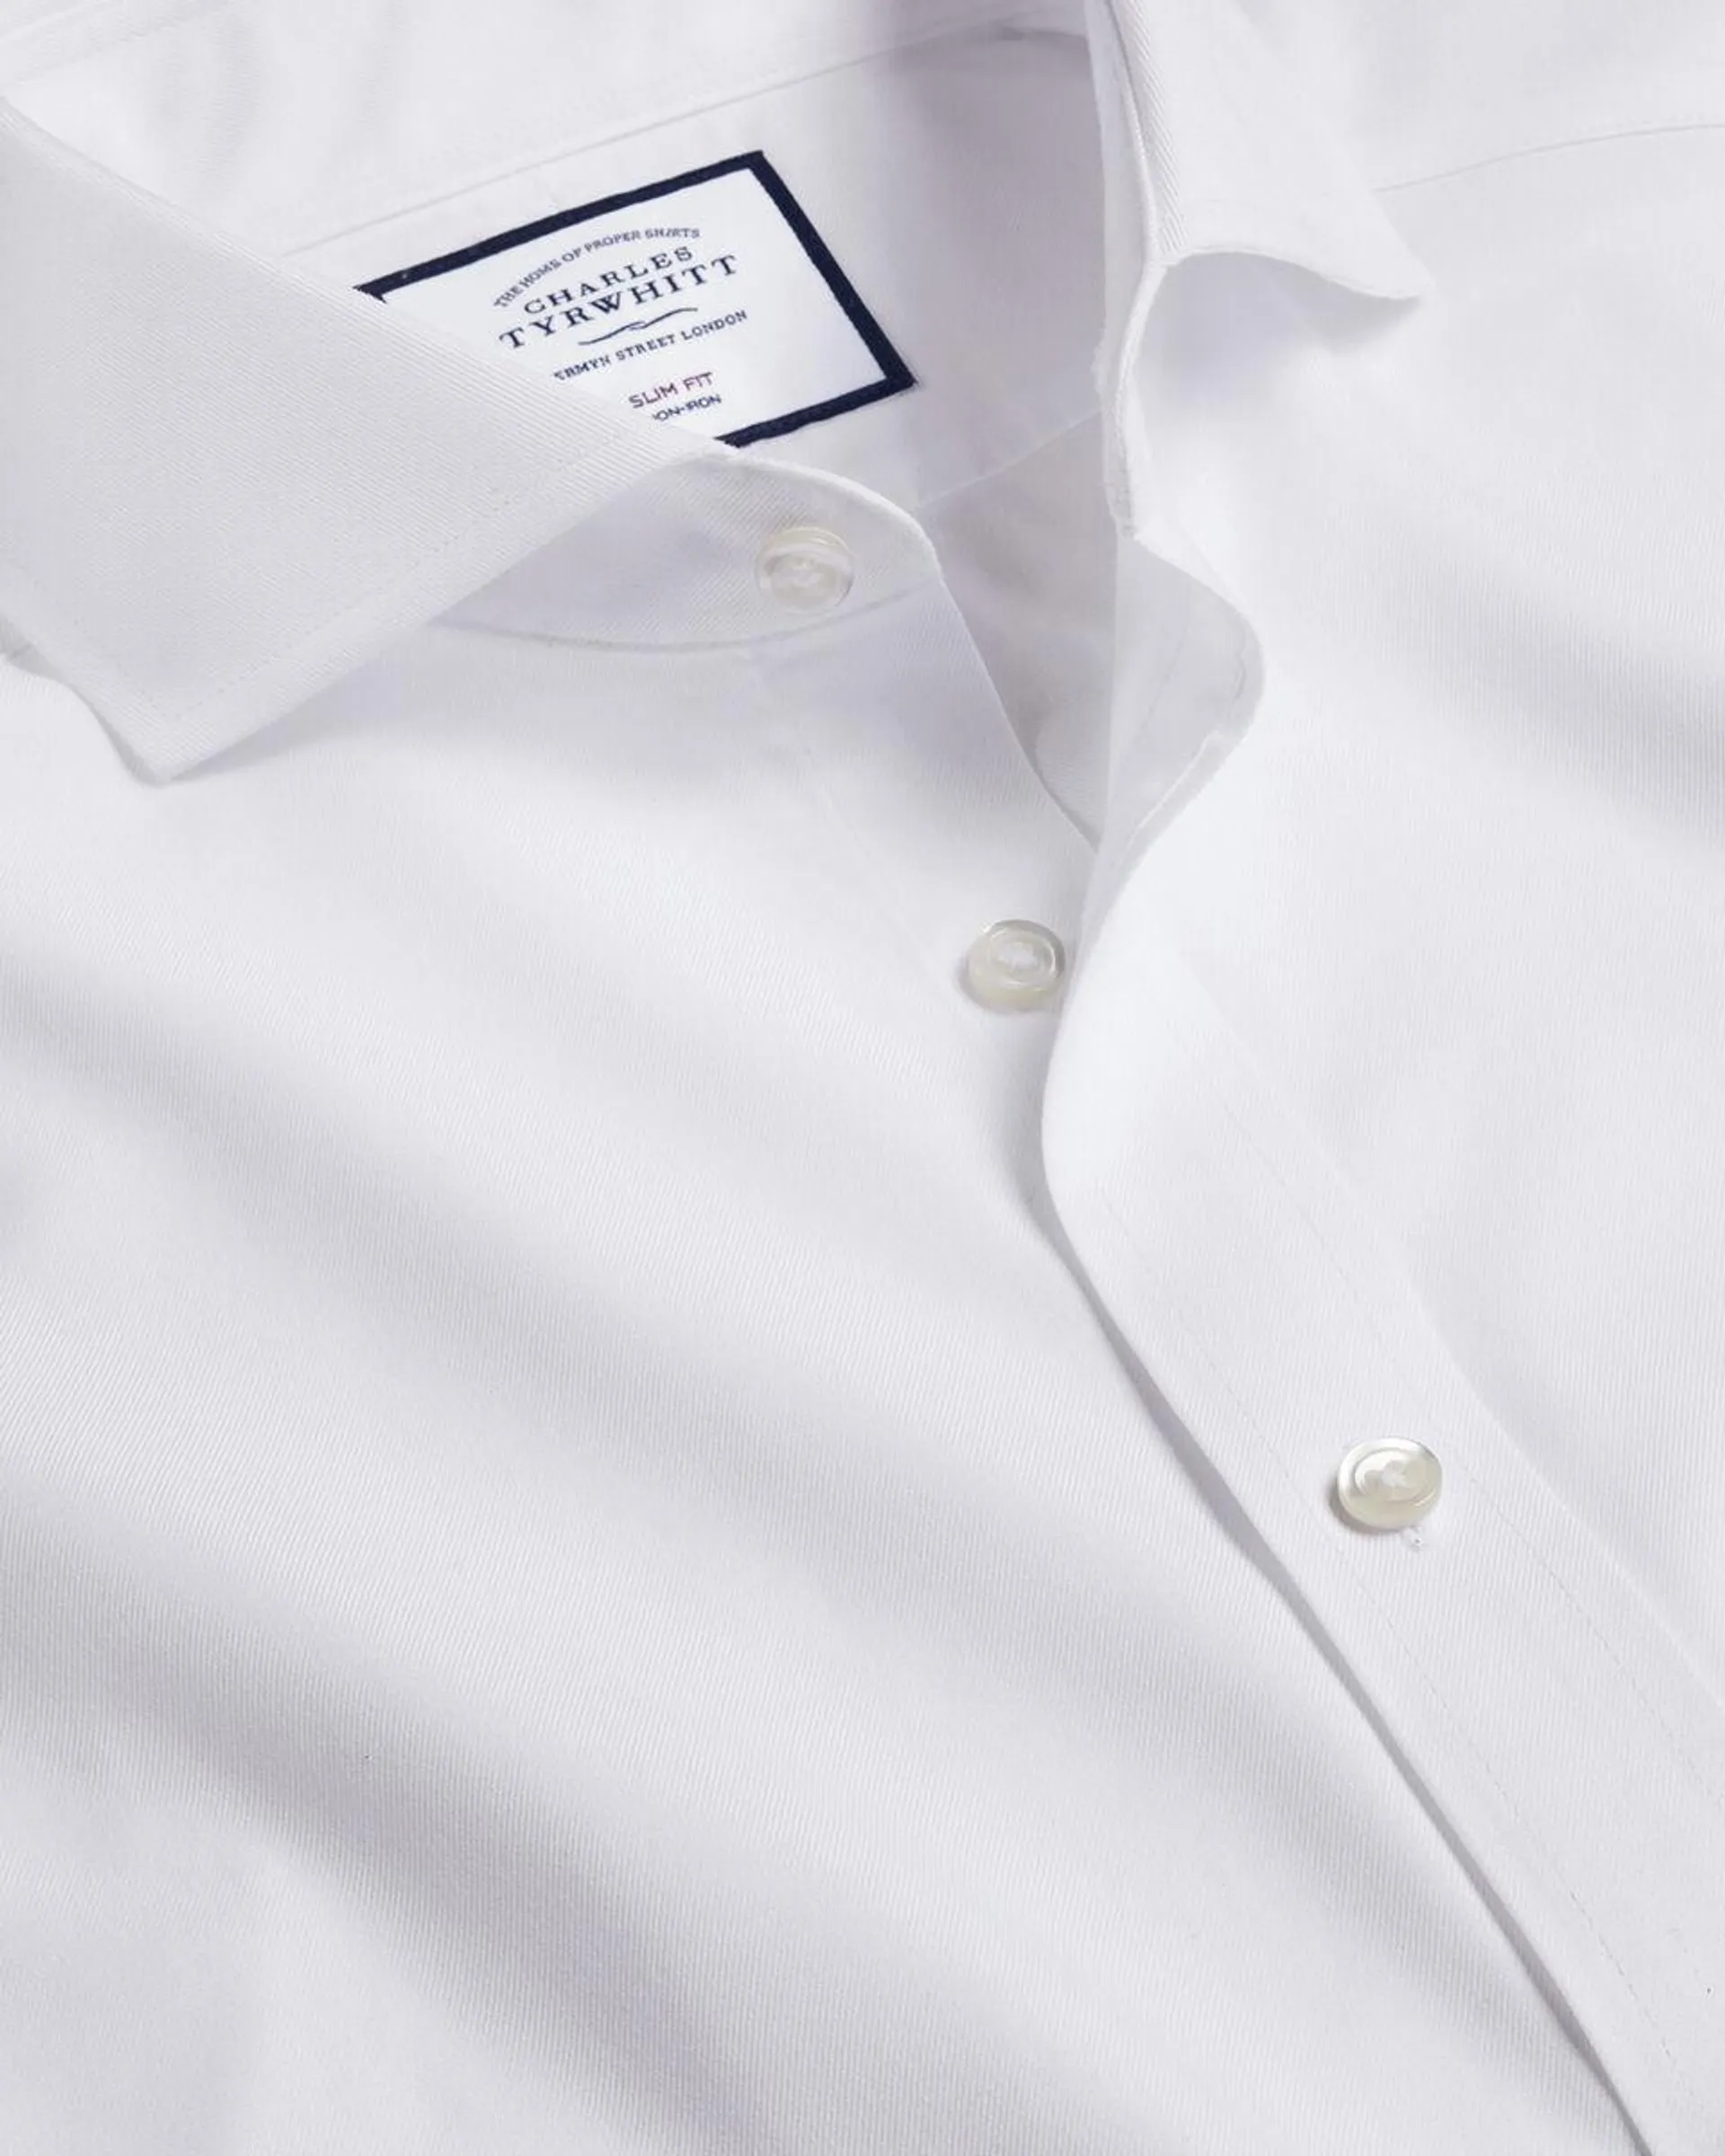 details about product: Extreme Cutaway Collar Non-Iron Twill Shirt - White